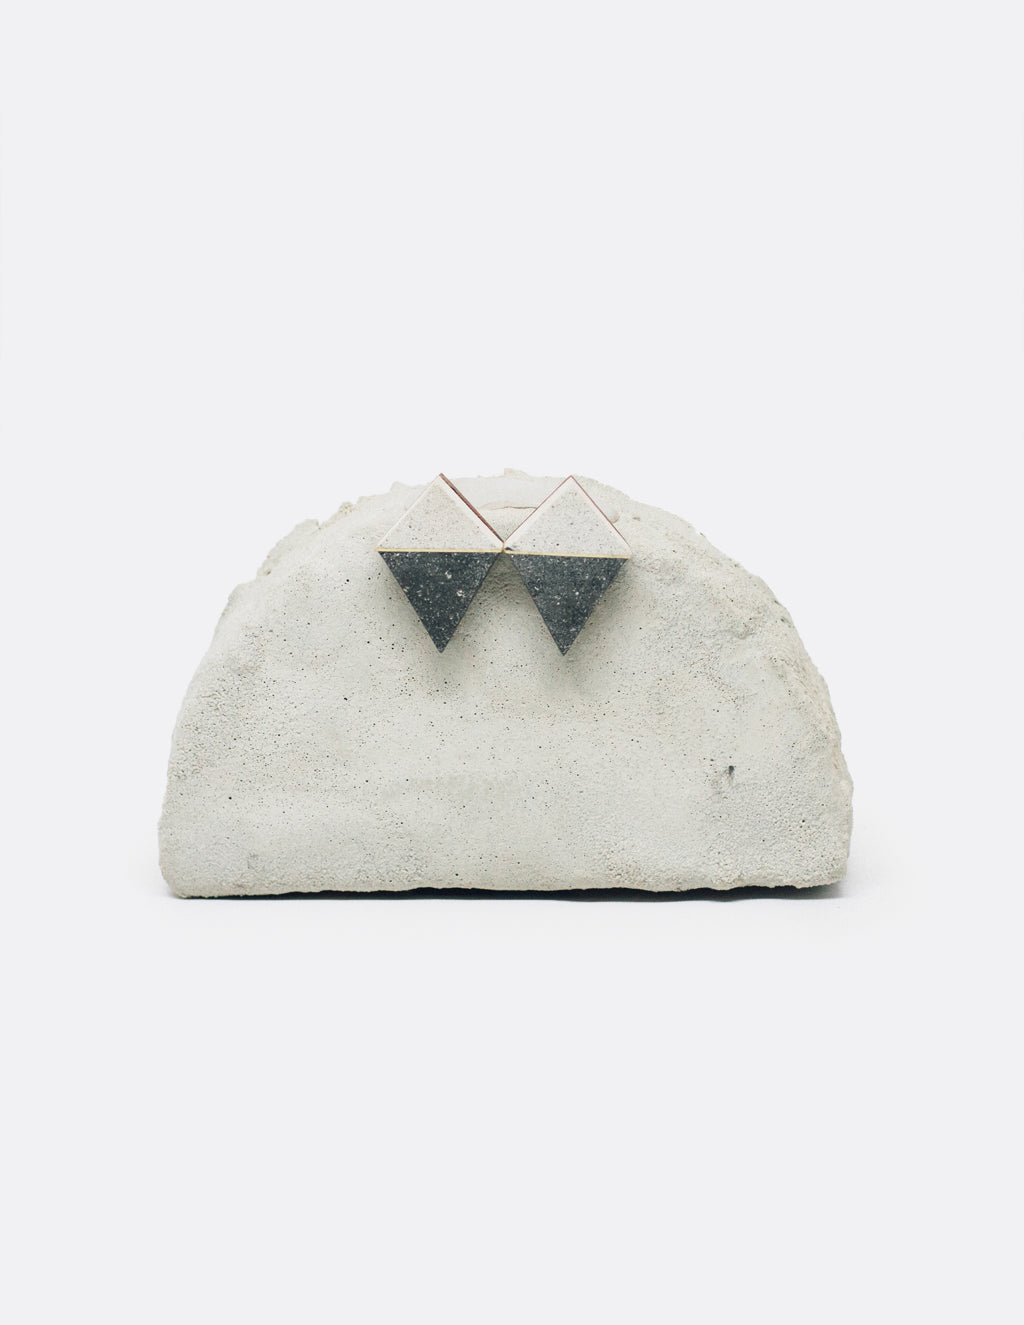 Yomo Studio black & white rhombus earrings. Materials include: concrete, brass, and walnut wood.